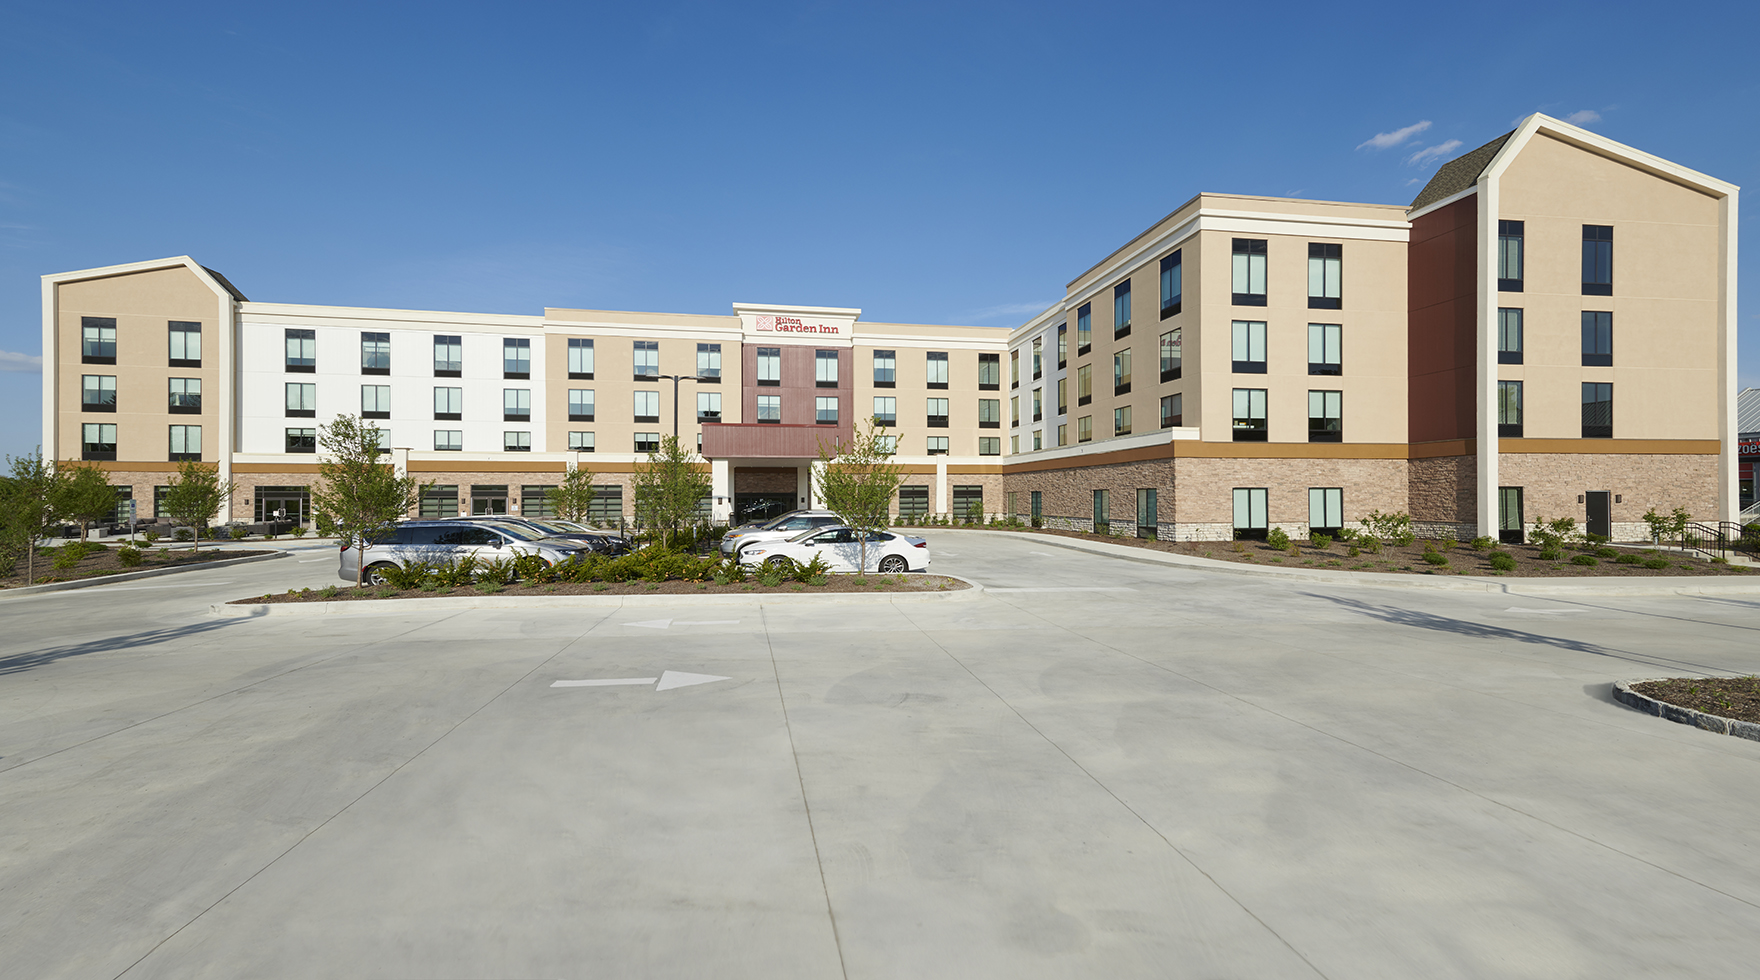 The exterior of the Hilton Garden Inn with a parking lot with cars in front.